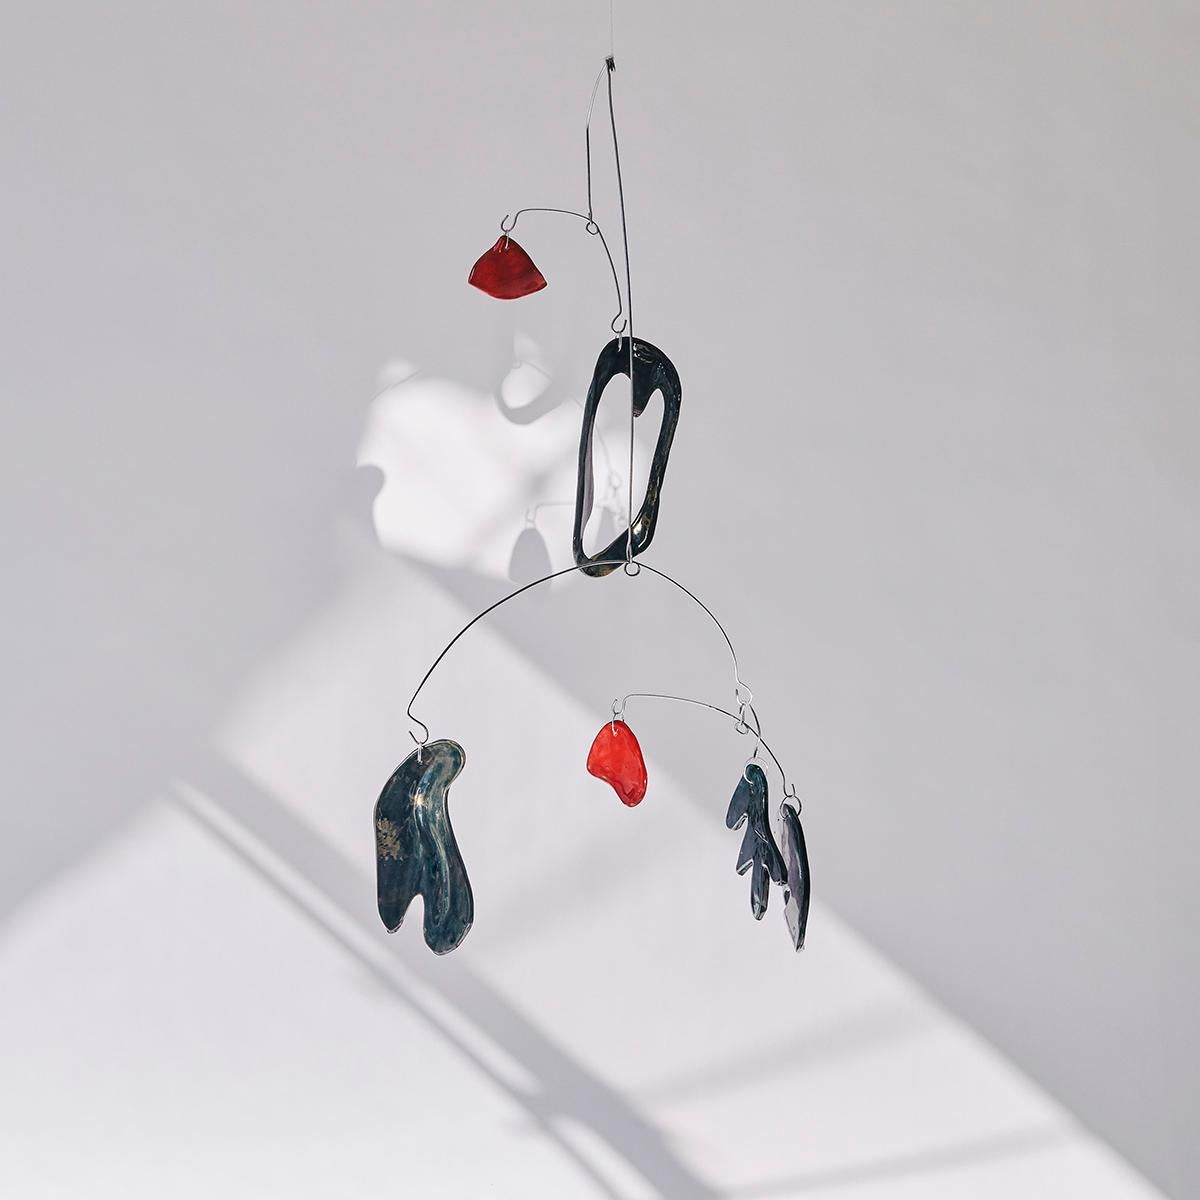 Alejandra Jaimes is a young Colombian artist based in Barcelona, focused on installation and experimentation with new materials. Inspired by great artists such as Alexander Calder, Alejandra explores her surrounding reality, through form and pure